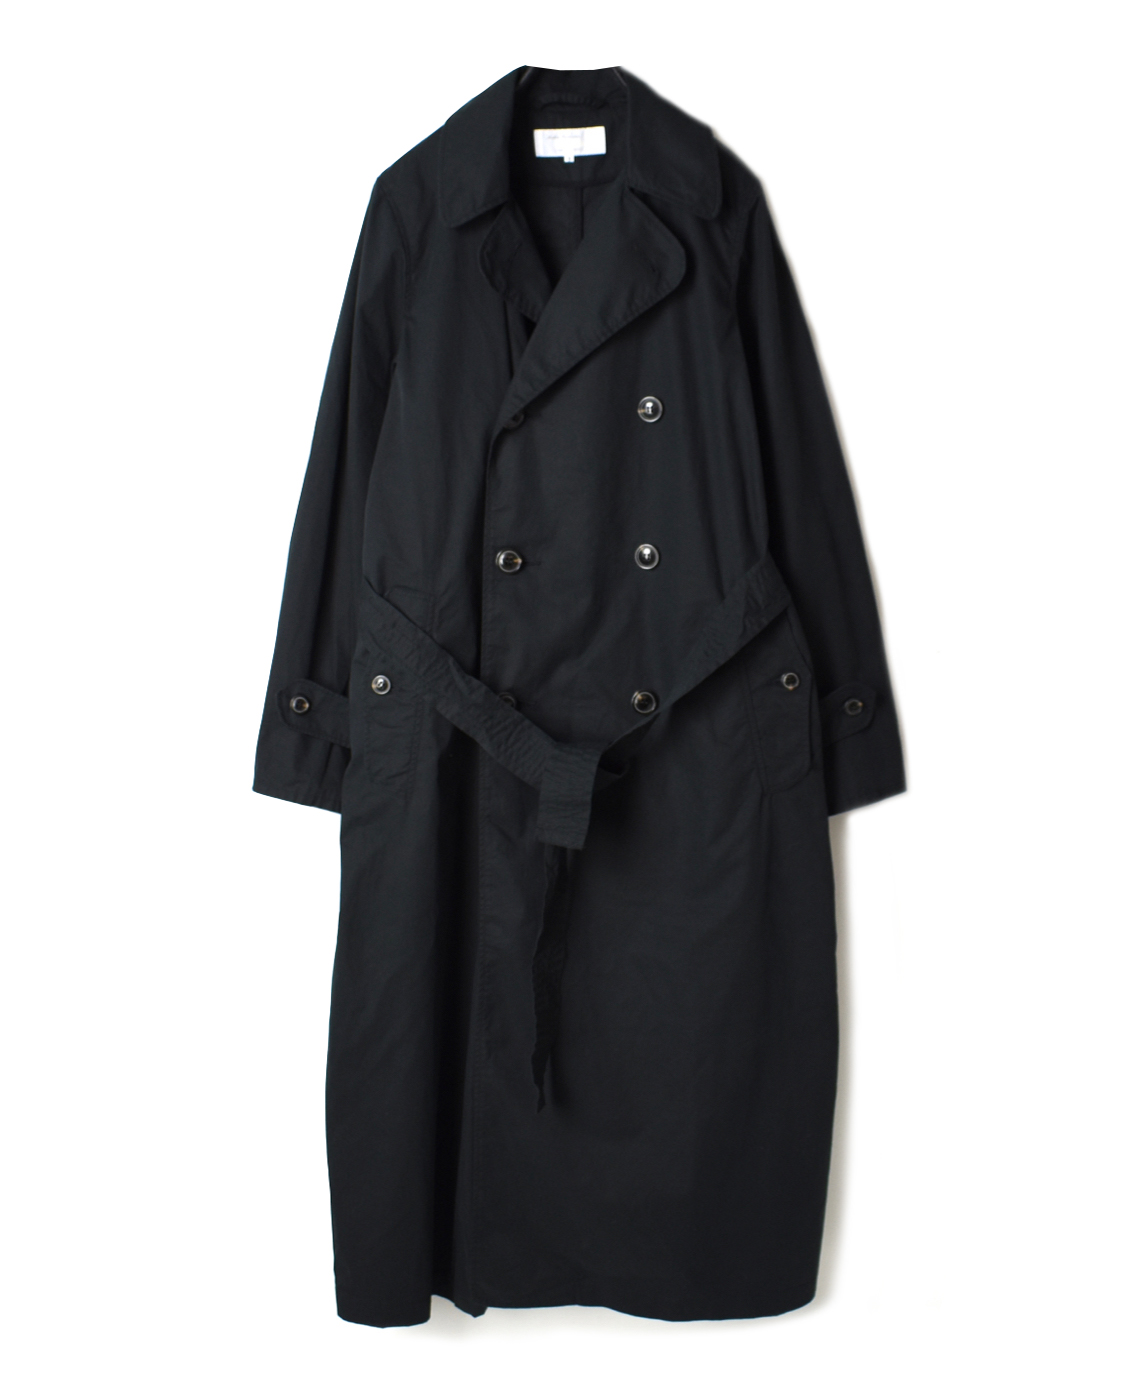 NMPA1701B DOUBLE BREASTED COAT WITH SASH BELT